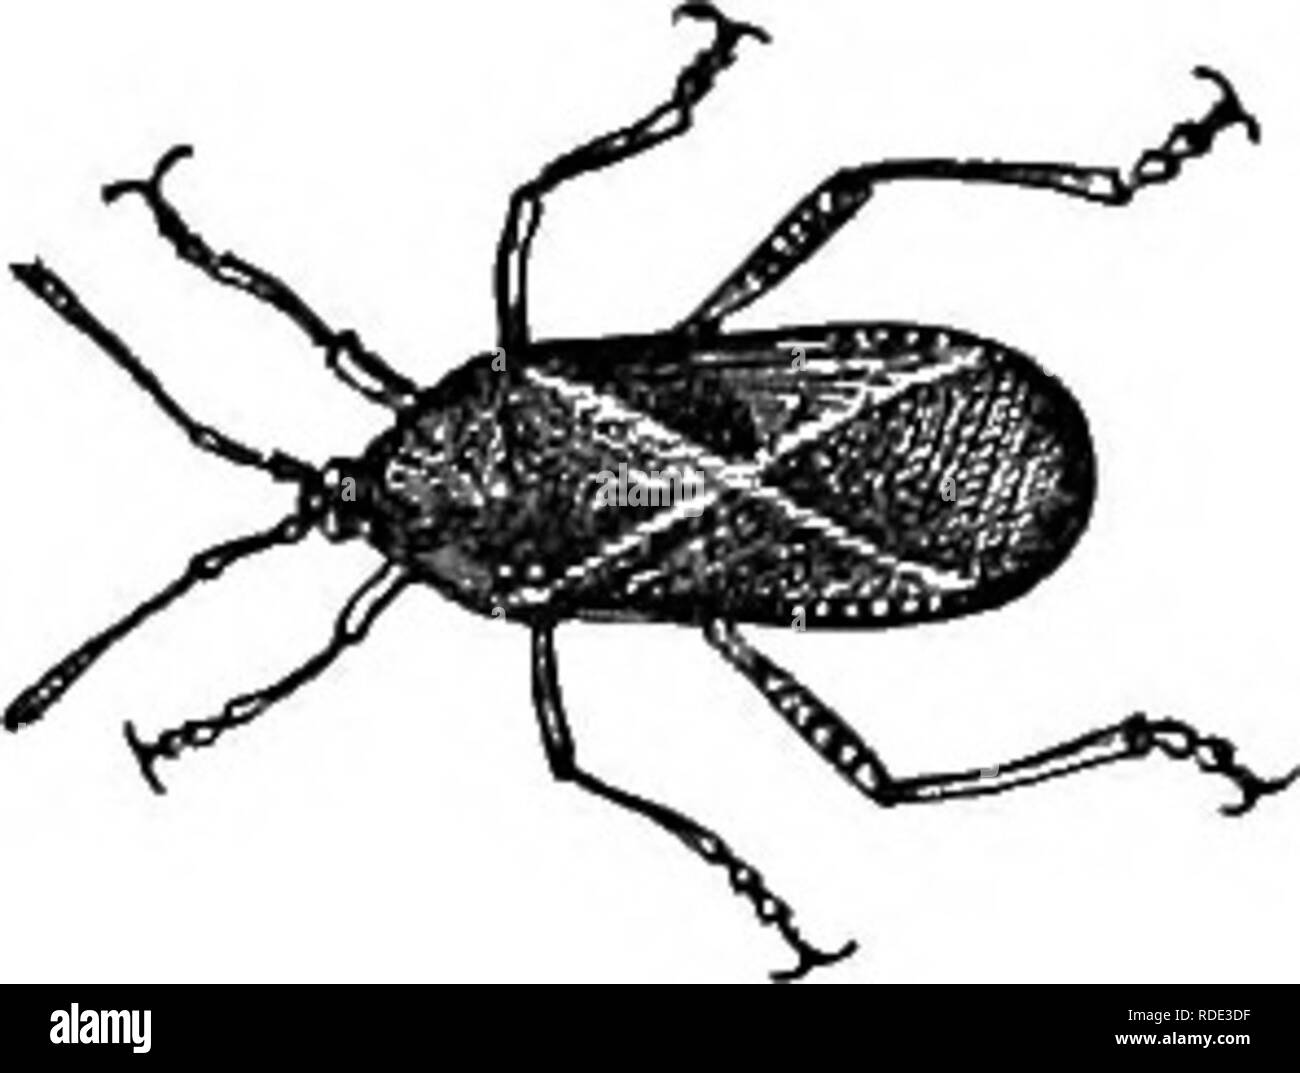 . Natural history of animals. Containing brief descriptions of the animals figured on Tenney's Natural history tablets, but complete without the tablets. Zoology. Fig. 321. — Scorpion Bug, or Nepa. Fig. 322. — Squash Bug. SQUASH BUGS. The Squash Bug passes the winter in a torpid state, and when the leaves of the squash appear it lays its eggs in clusters on the under side of tliem. STRAIGHT-WINGED INSECTS, OR ORTHOPTERS. These insects have wings which lie straight along the top or sides of tlie back. They do not pass through tlie marked stages of larva and pupa in coming to the adult state; bu Stock Photo